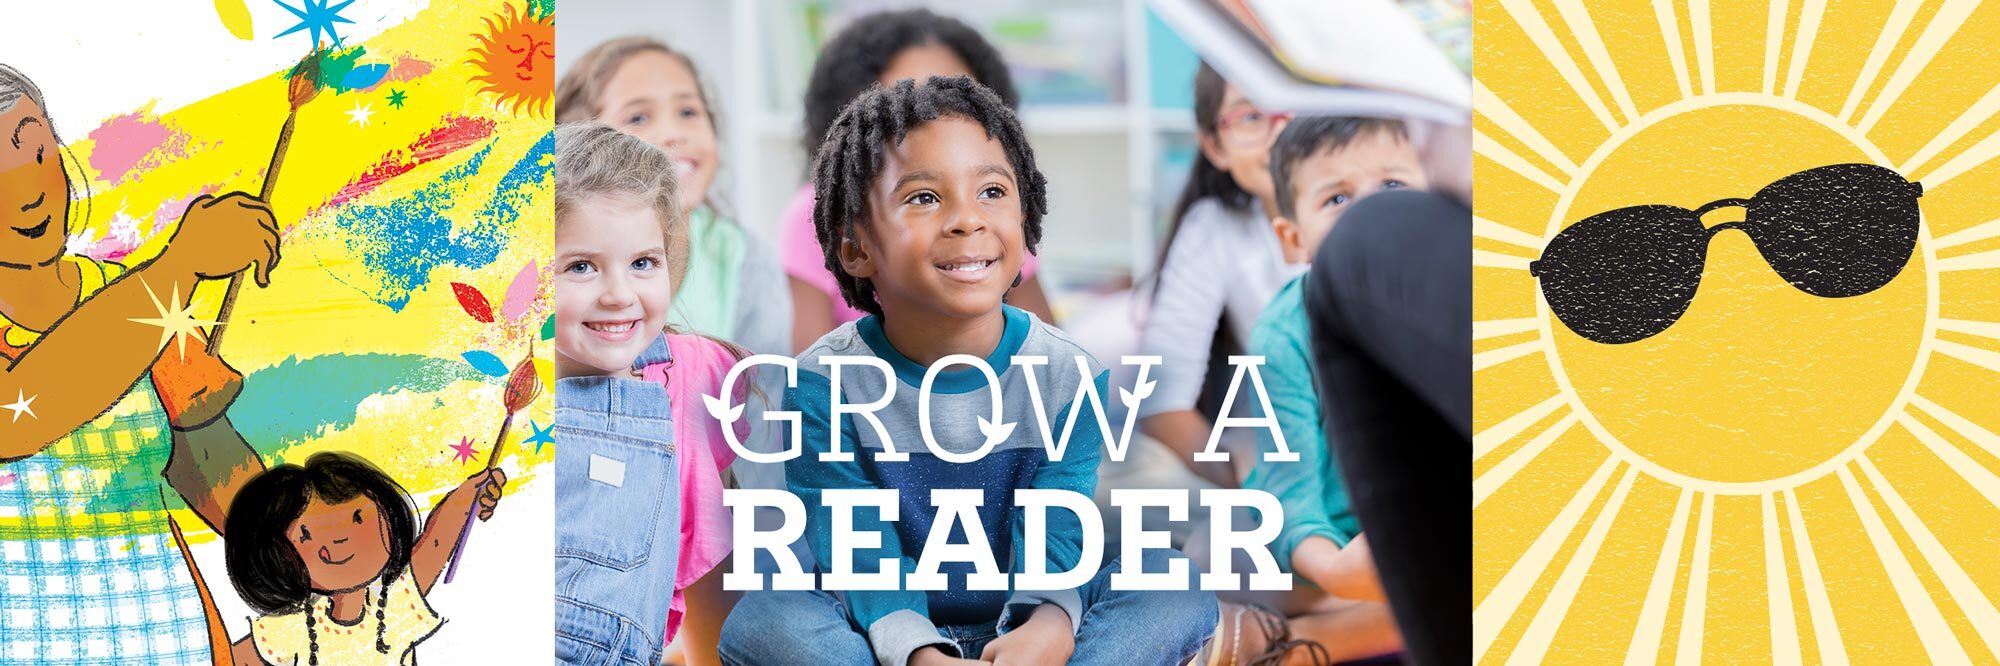 Grow a Reader - reading and special events for young children